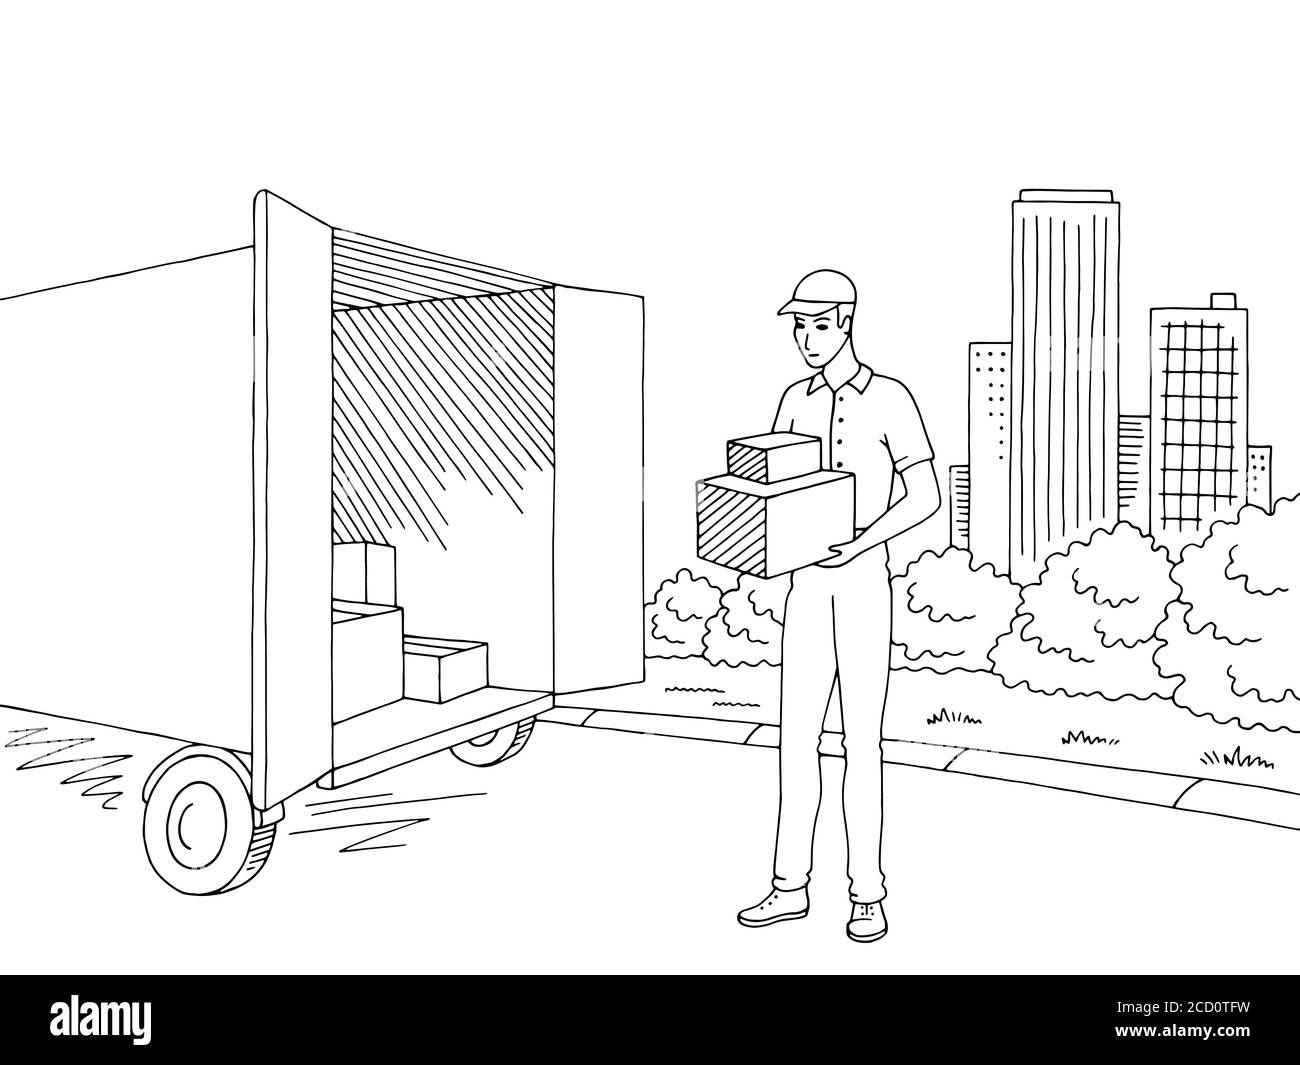 Delivery man holding a box. Street road graphic black white city landscape sketch illustration vector Stock Vector